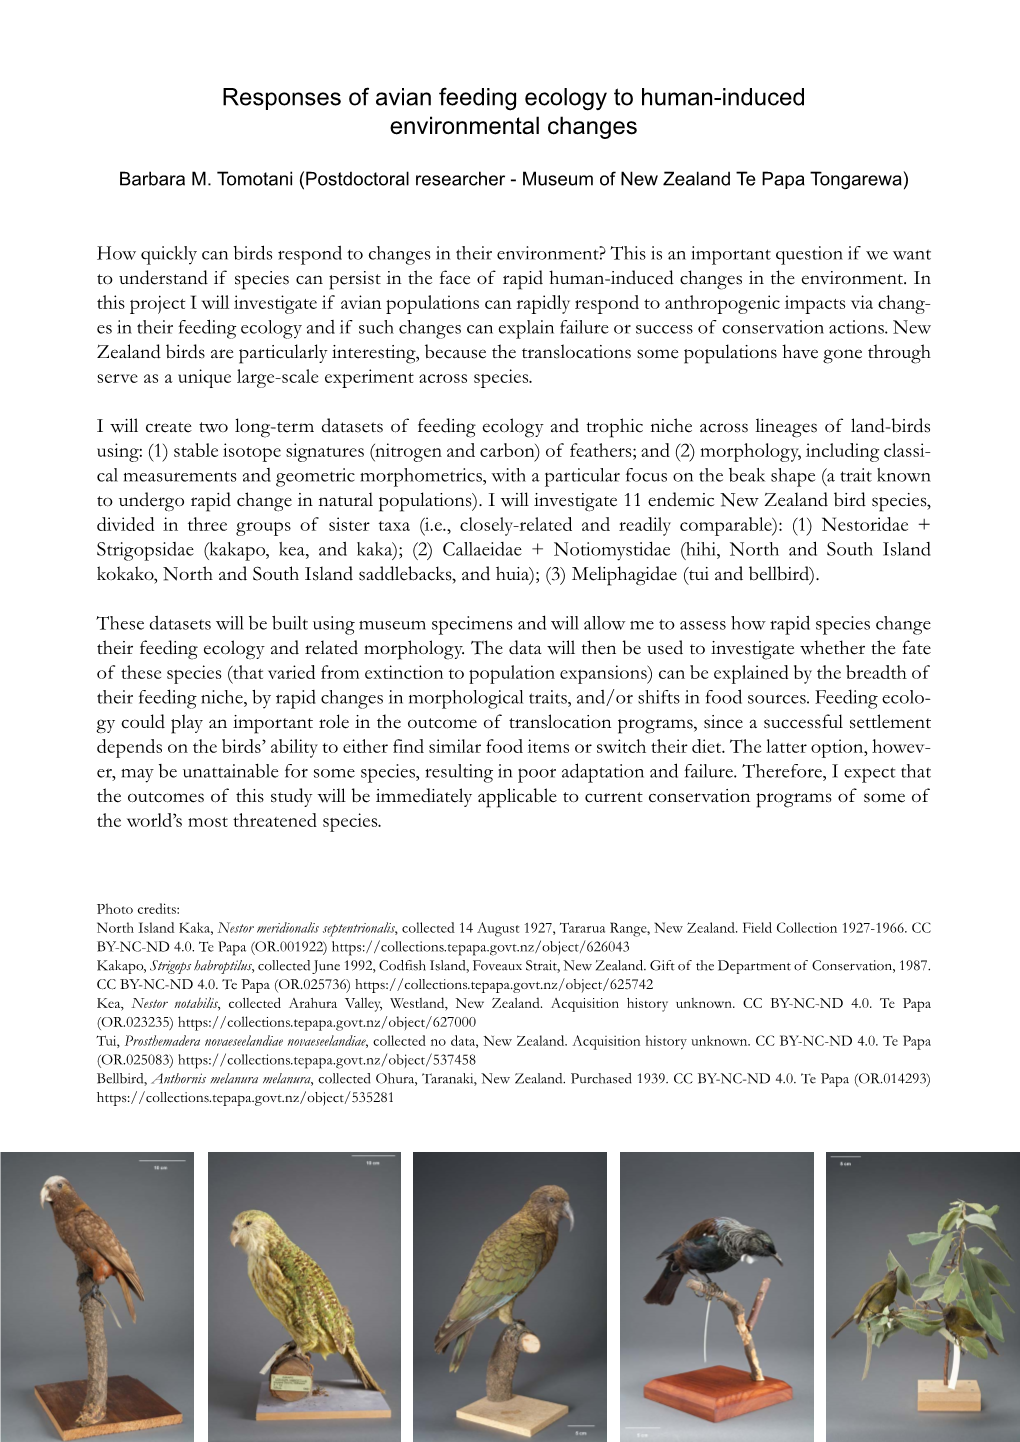 Responses of Avian Feeding Ecology to Human-Induced Environmental Changes